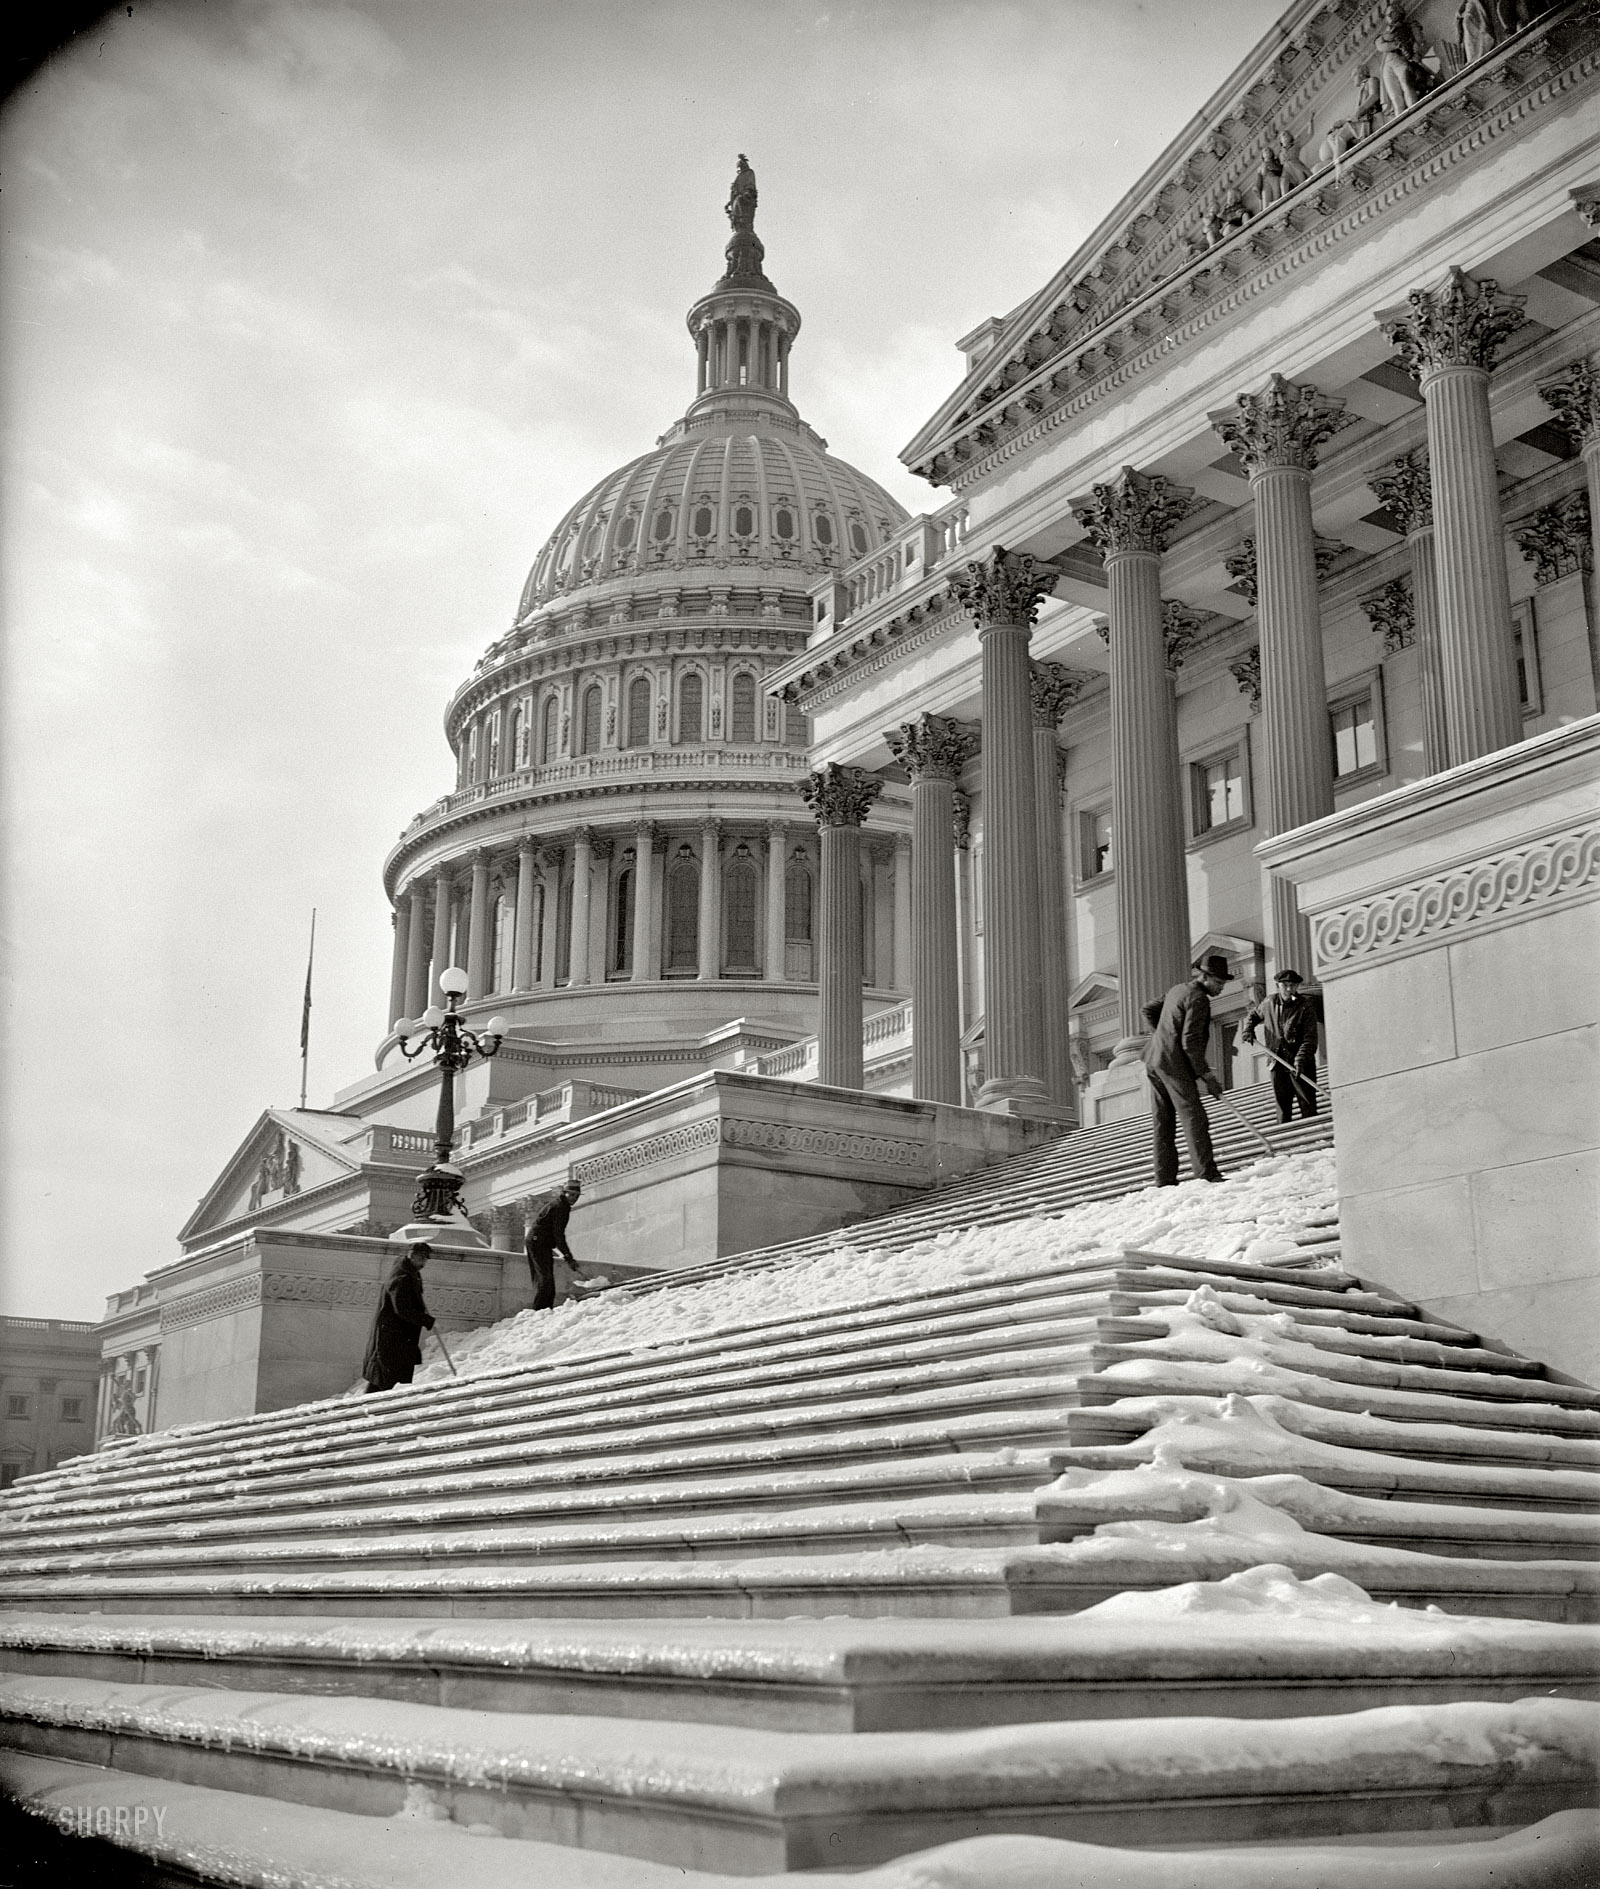 January 14, 1939. "National Capital digs out after storm. Nearly five inches of snow blanketed Washington yesterday, followed by sleet. Icy steps made the going to and from the Capitol difficult until workmen arrived this morning and scraped away the menace." Harris & Ewing Collection glass negative. View full size.